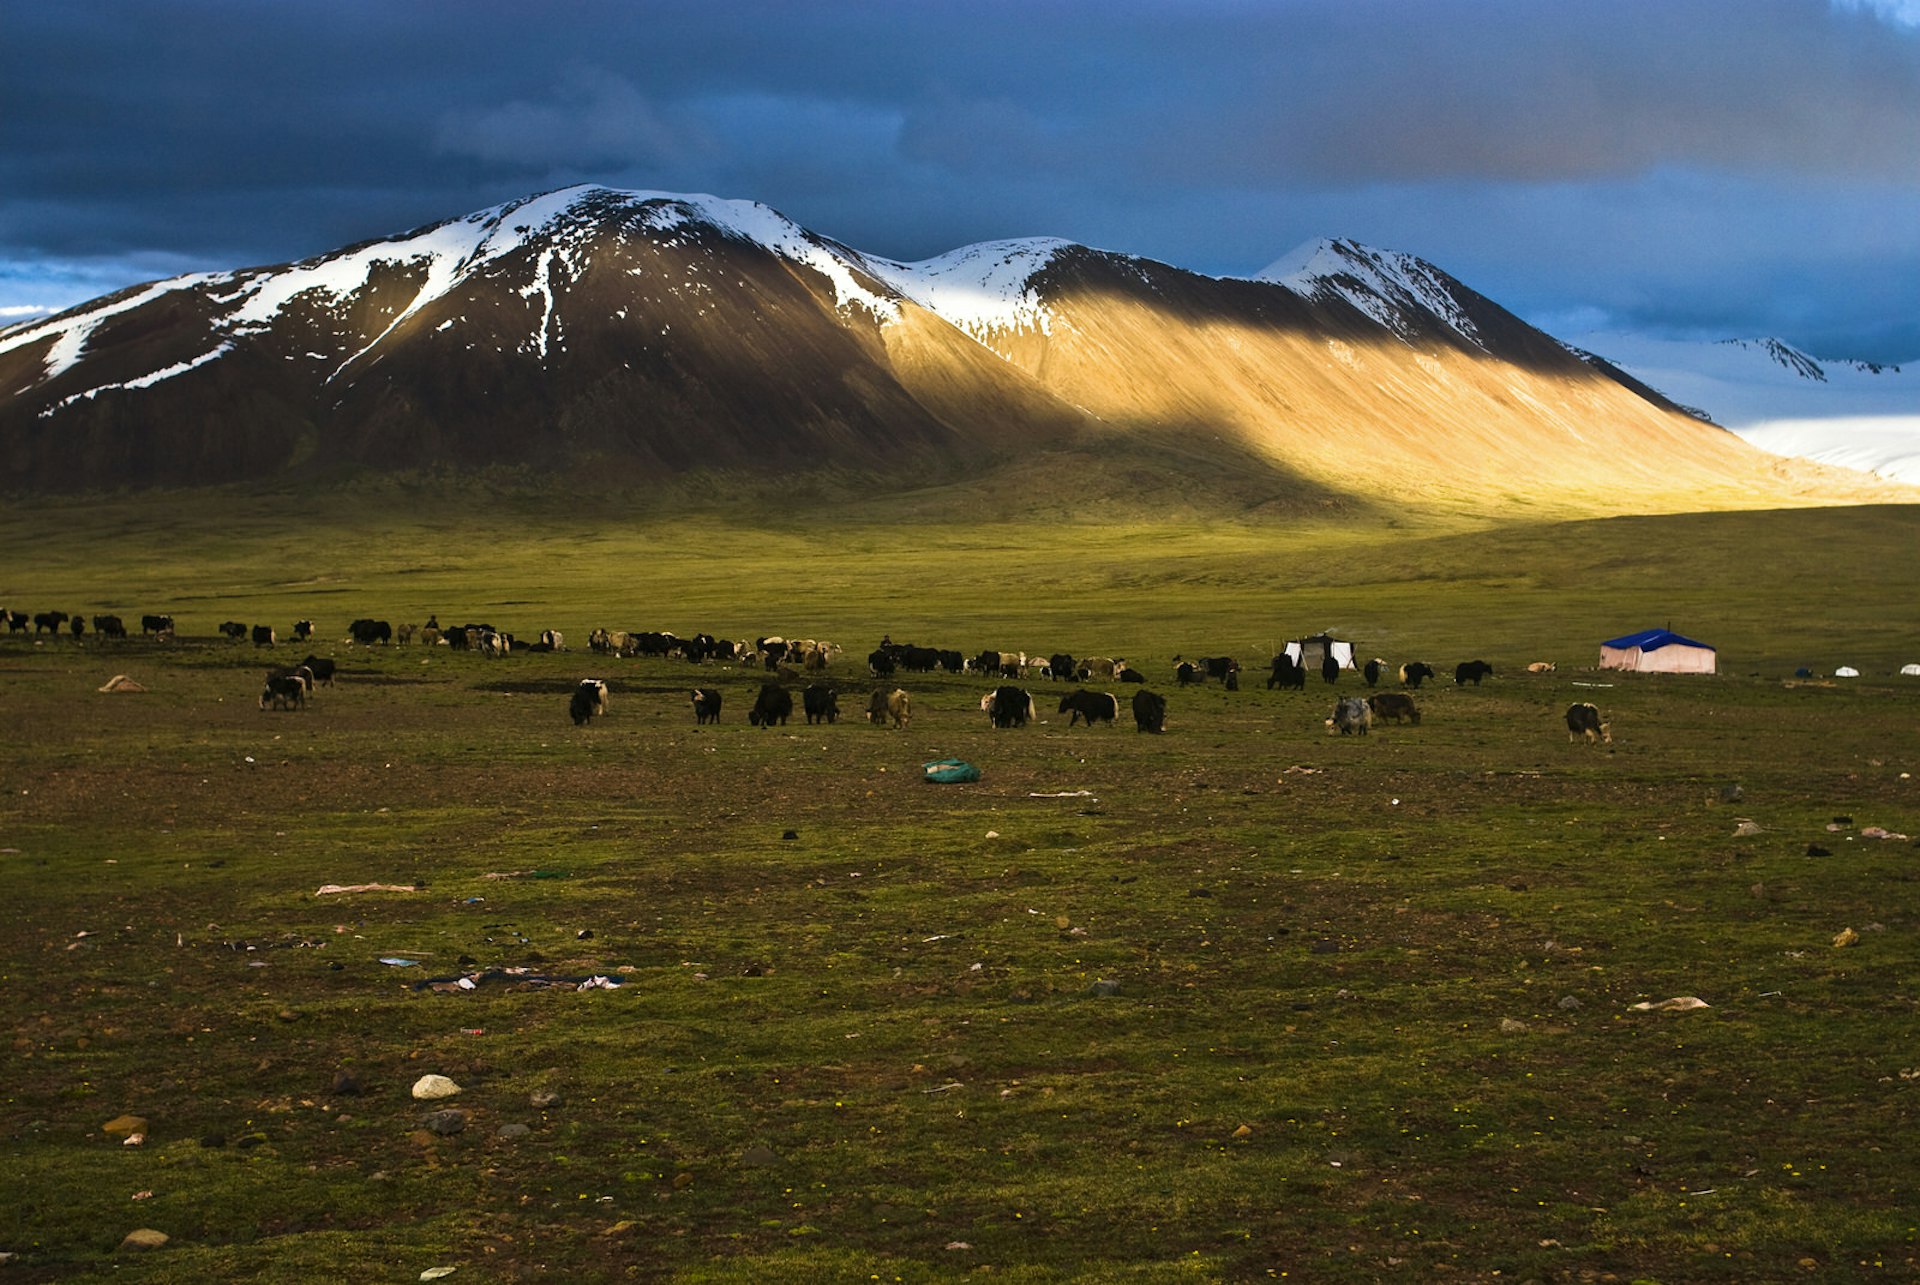 Nomads live closely with their yaks, using yaks for food and shelter © Sino Images / Getty